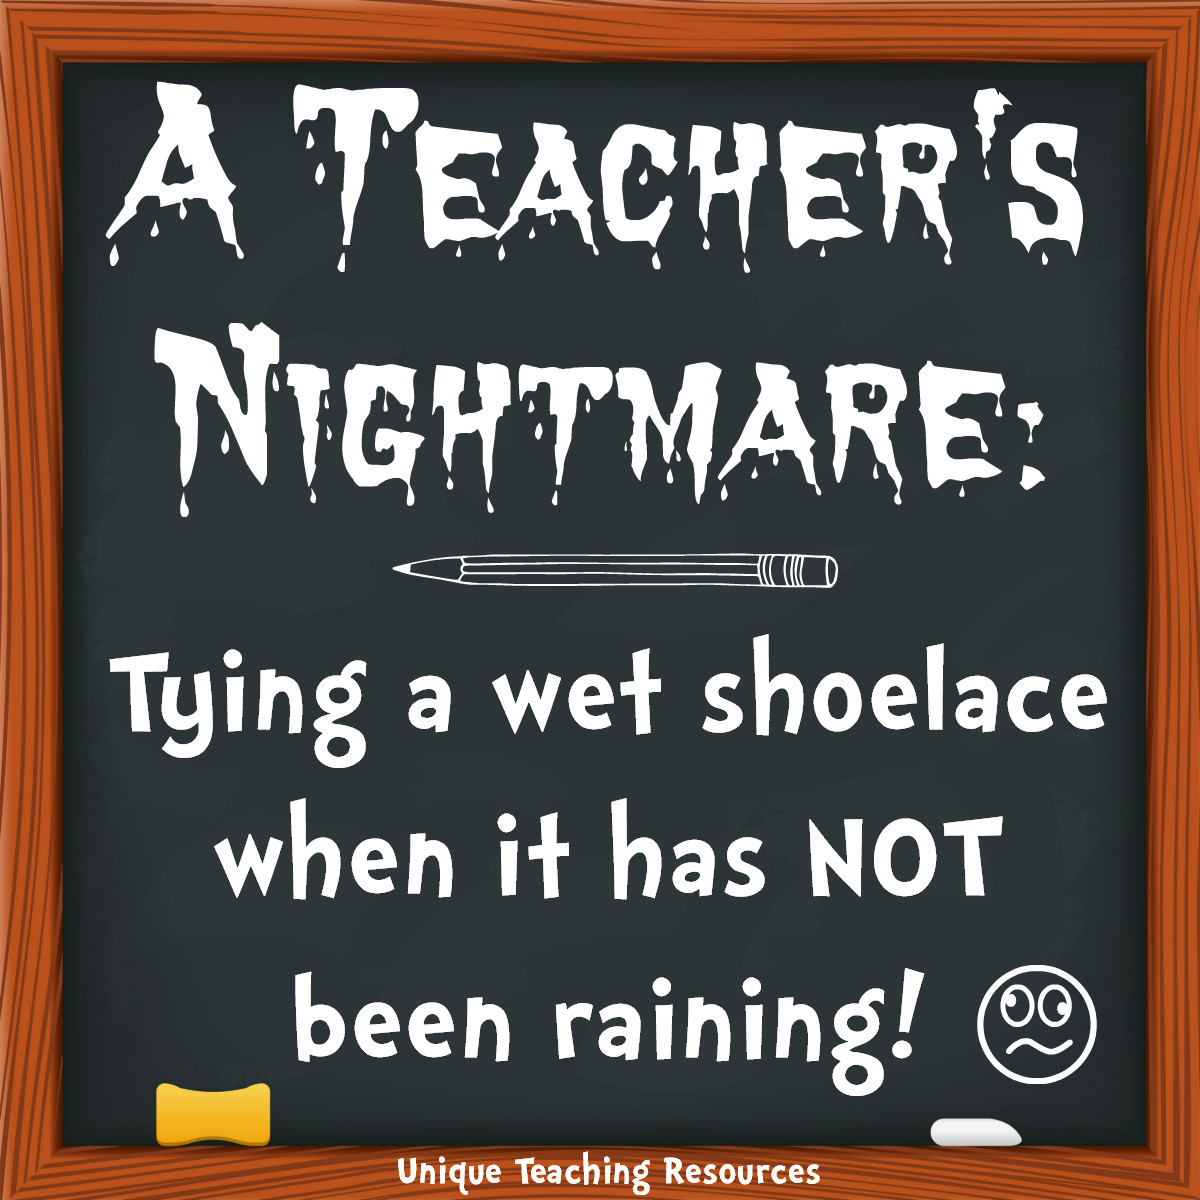 Funny Teaching Quotes
 100 Funny Teacher Quotes Page 8